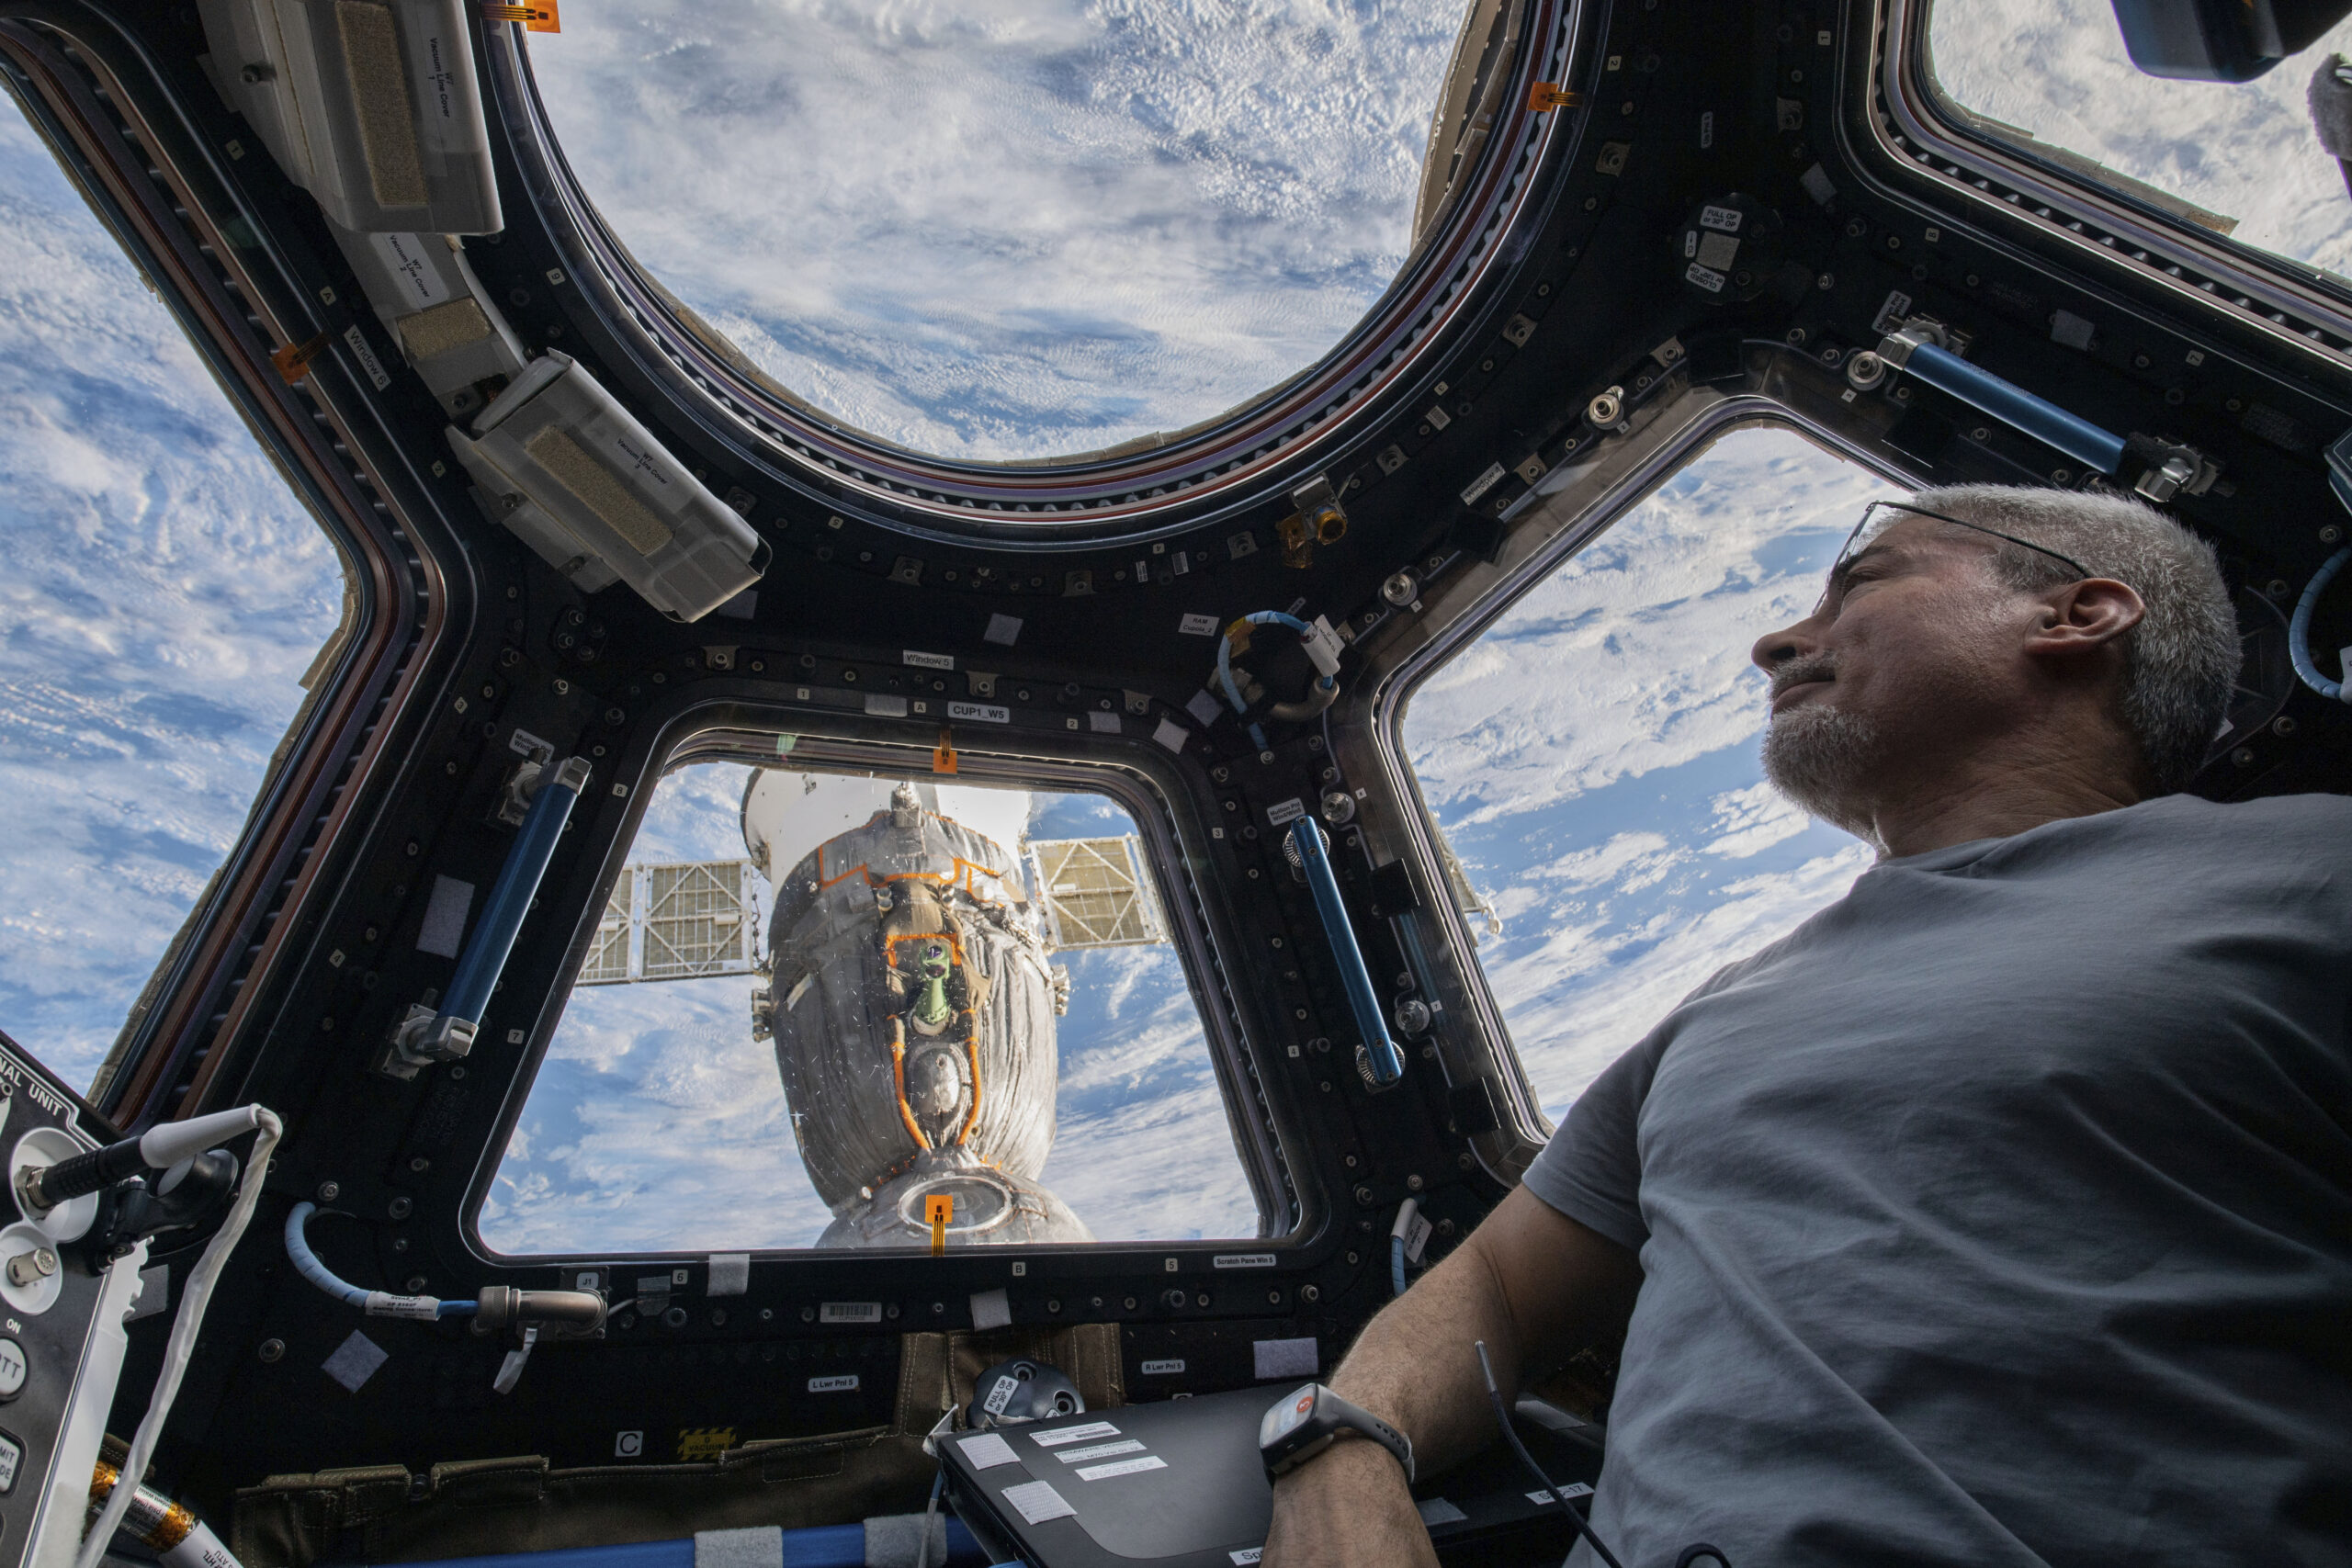 In this photo provided by NASA, U.S. astronaut and Expedition 66 Flight Engineer Mark Vande Hei peers at the Earth below from inside the seven-windowed cupola, the International Space Station's window to the world on Feb. 4, 2022. The Soyuz MS-19 crew ship is docked to the Rassvet module in the background. Vande Hei has made it through nearly a year in space, but in March 2022 faces what could be his trickiest assignment yet: riding a Russian capsule back to Earth in the midst of deepening tensions between the countries. (Kayla Barron/NASA via AP)